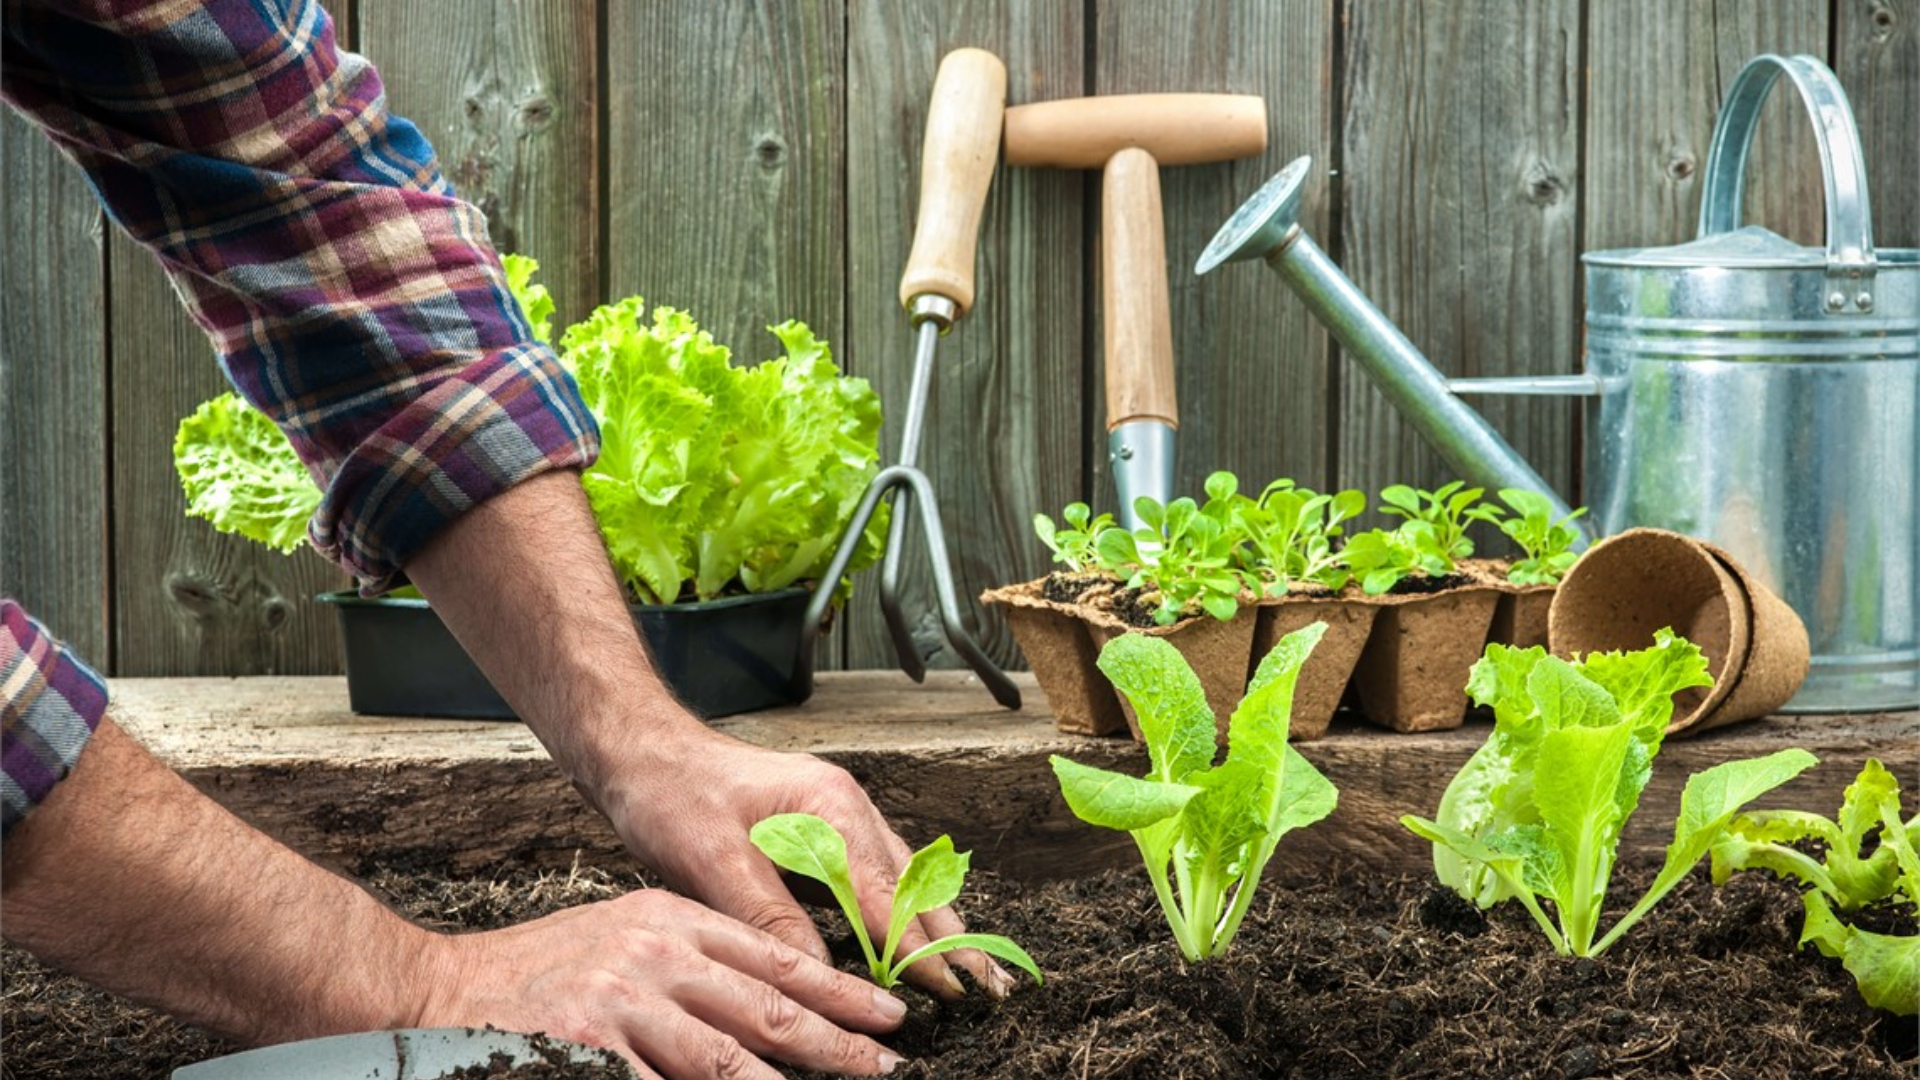 A beginners' guide for starting your own veggie garden